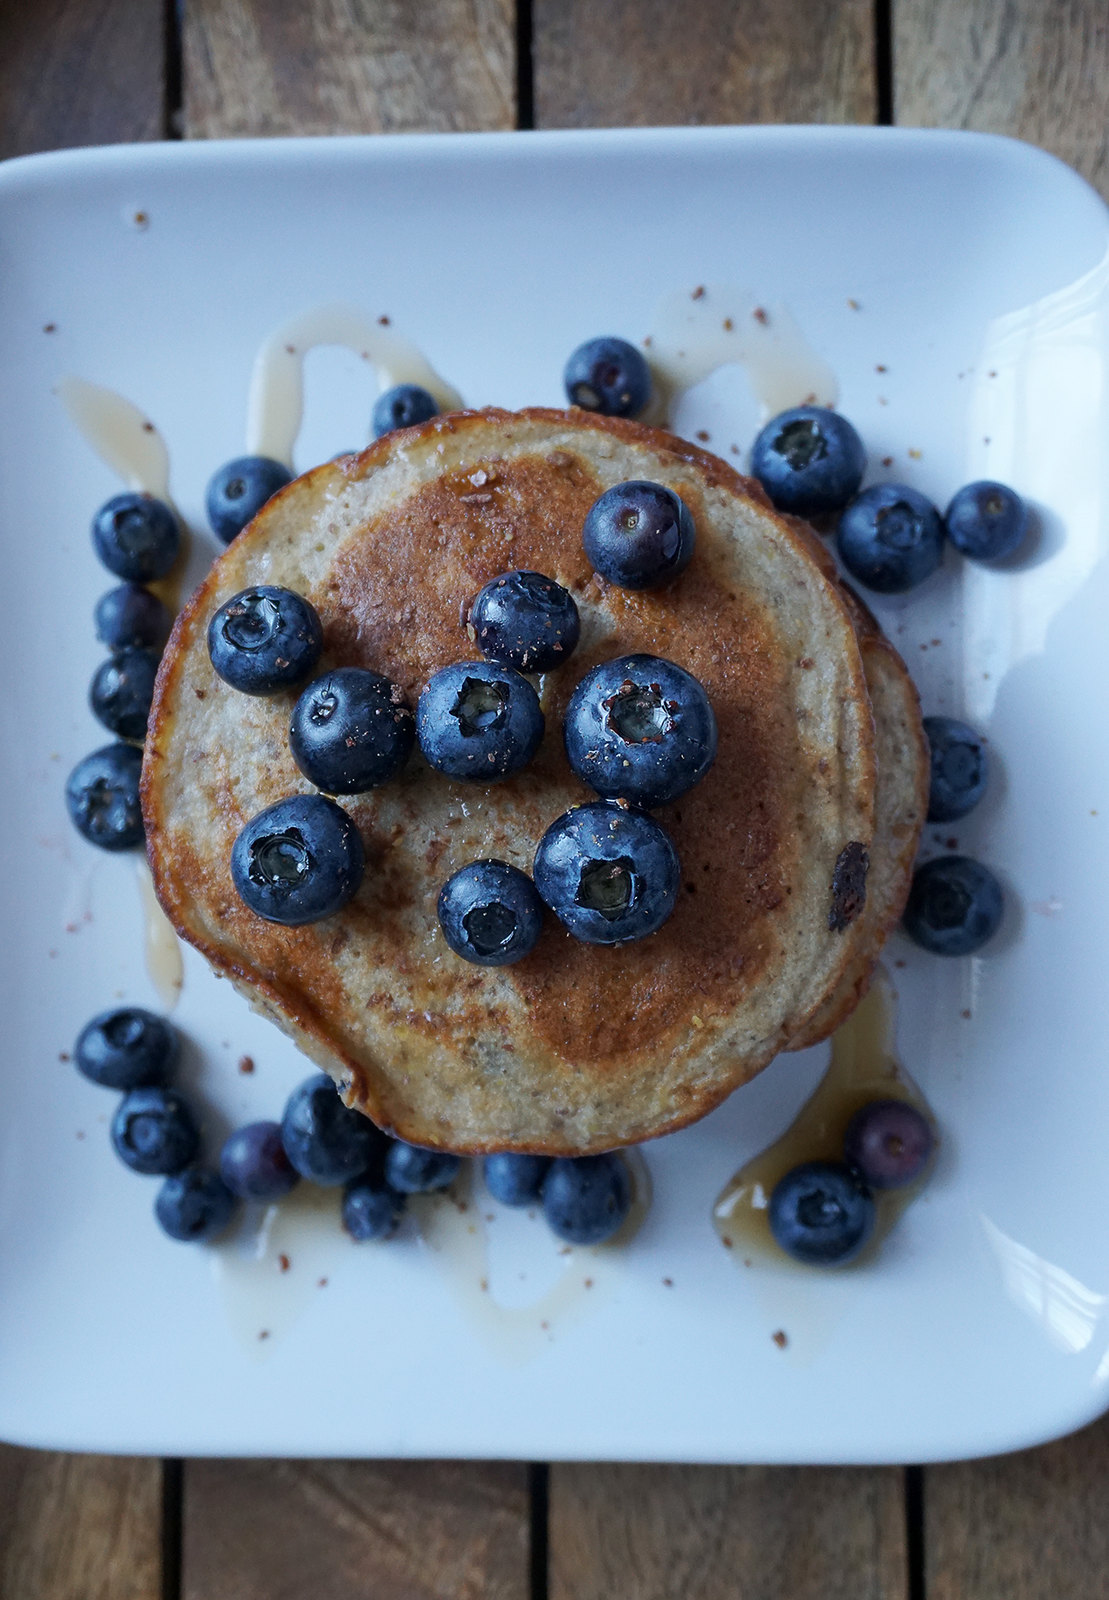 Healthy and gluten free banana flaxseed pancakes with blueberries and maple syrup - made with Doves Farm gluten free self-raising flour